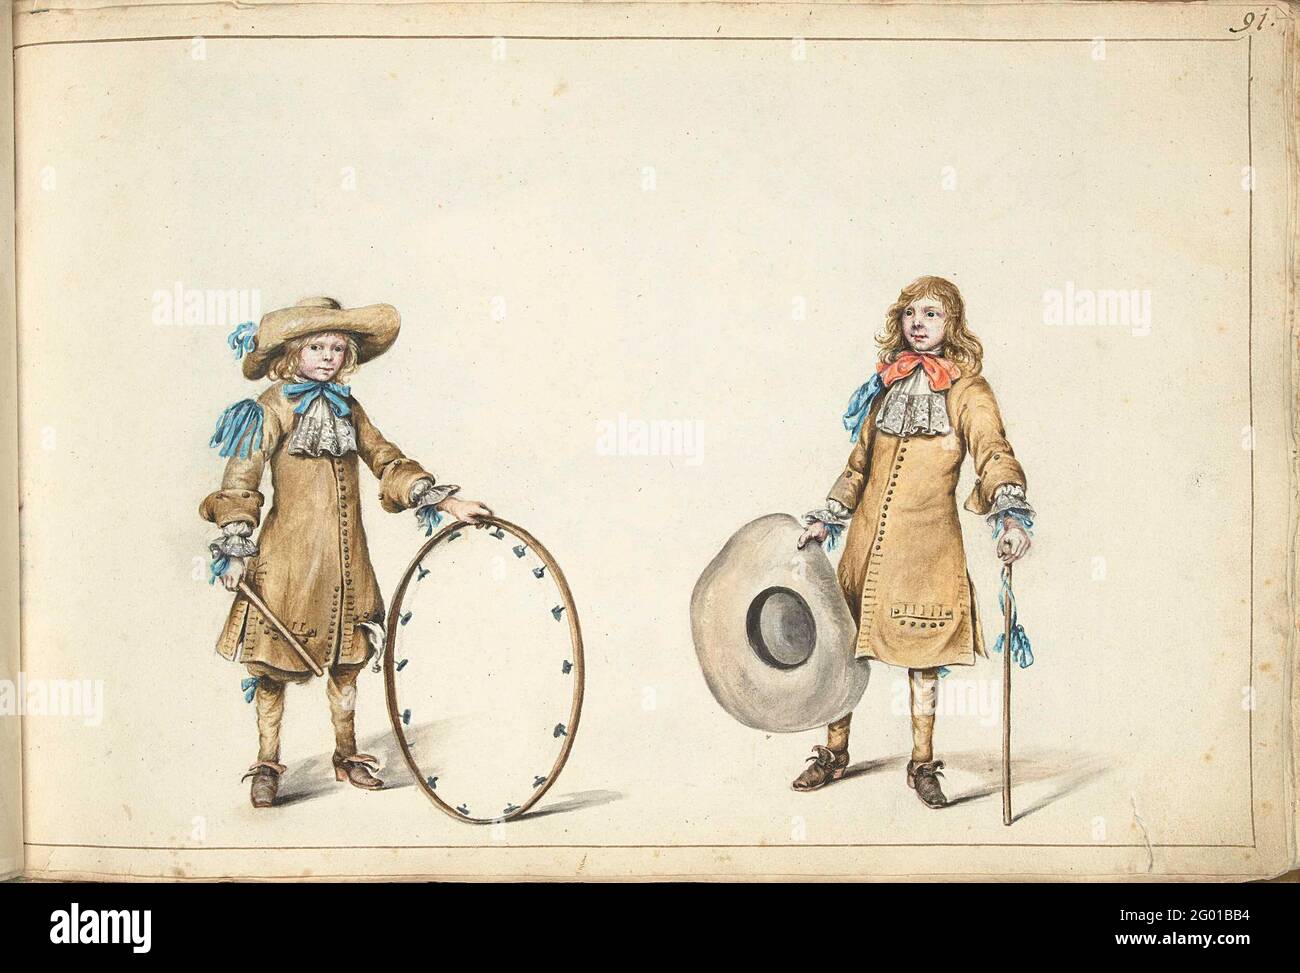 Gerrit and Cornelis Schellinger as a child. Gerrit and Cornelis Schellinger, nephews of Gesina ter Borch. Cornelis holds a hoop with loose metal particles that made noise when rolling. The oldest boy, gerrit, wears a hat with a large edge, possibly also part of a game. Stock Photo